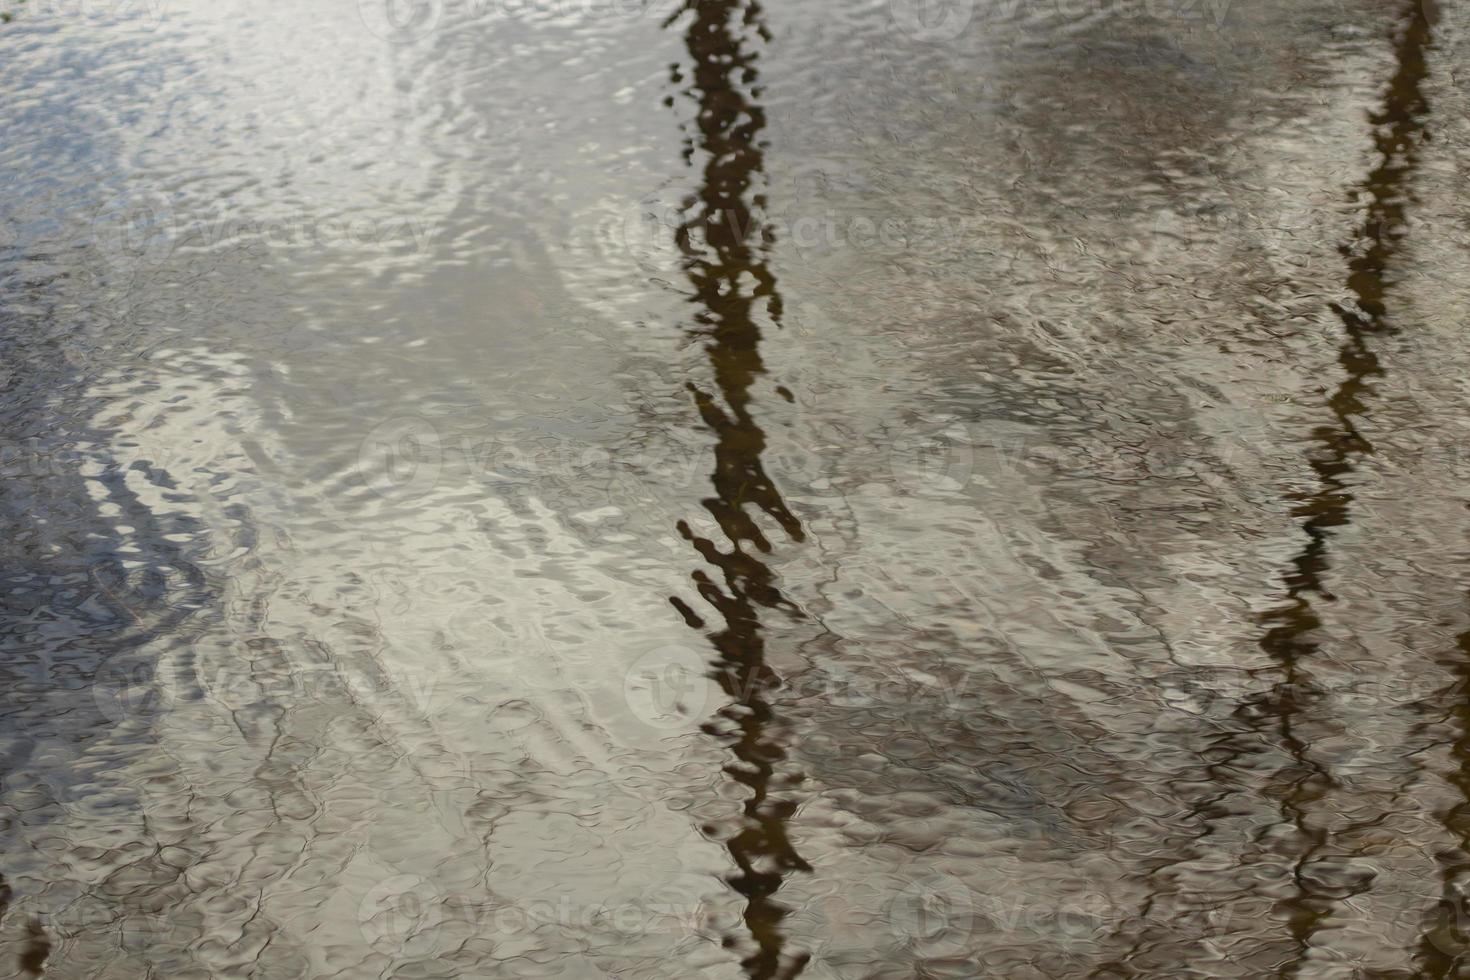 Water in spring. Waves on surface. Spring puddle. Details of nature. photo